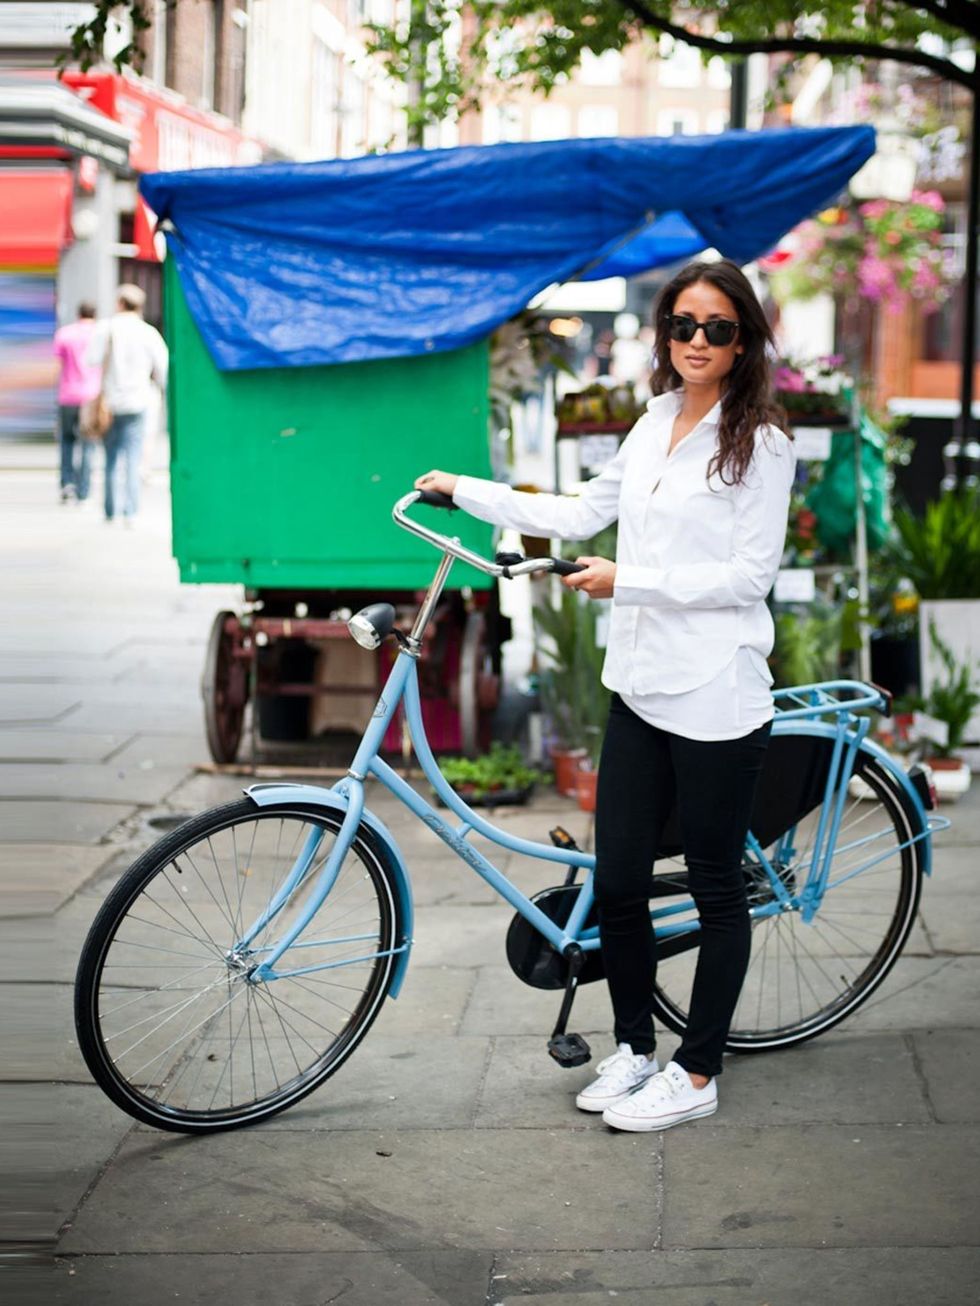 <p>Dama, 25. Delta bicycle, Zara shirt, Season of Humanity jeans, Converse trainers, Tiffany necklace.</p><p>Photo by Stephanie Sian Smith</p>